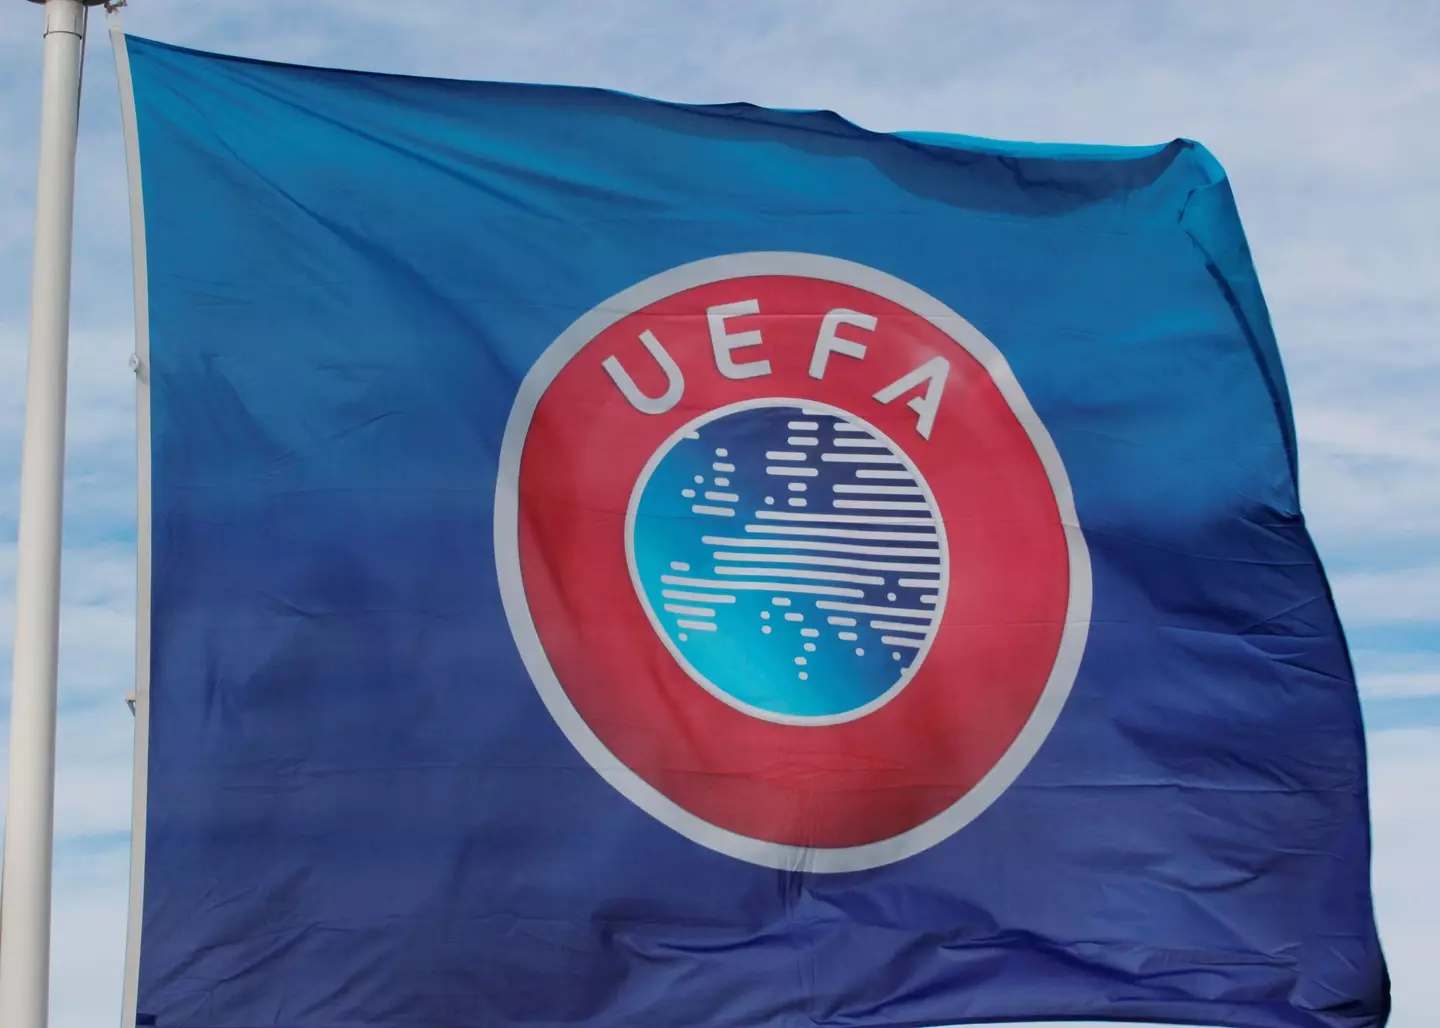 UEFA announced a fresh round of sanctions against Russia back in February (Image: PA)